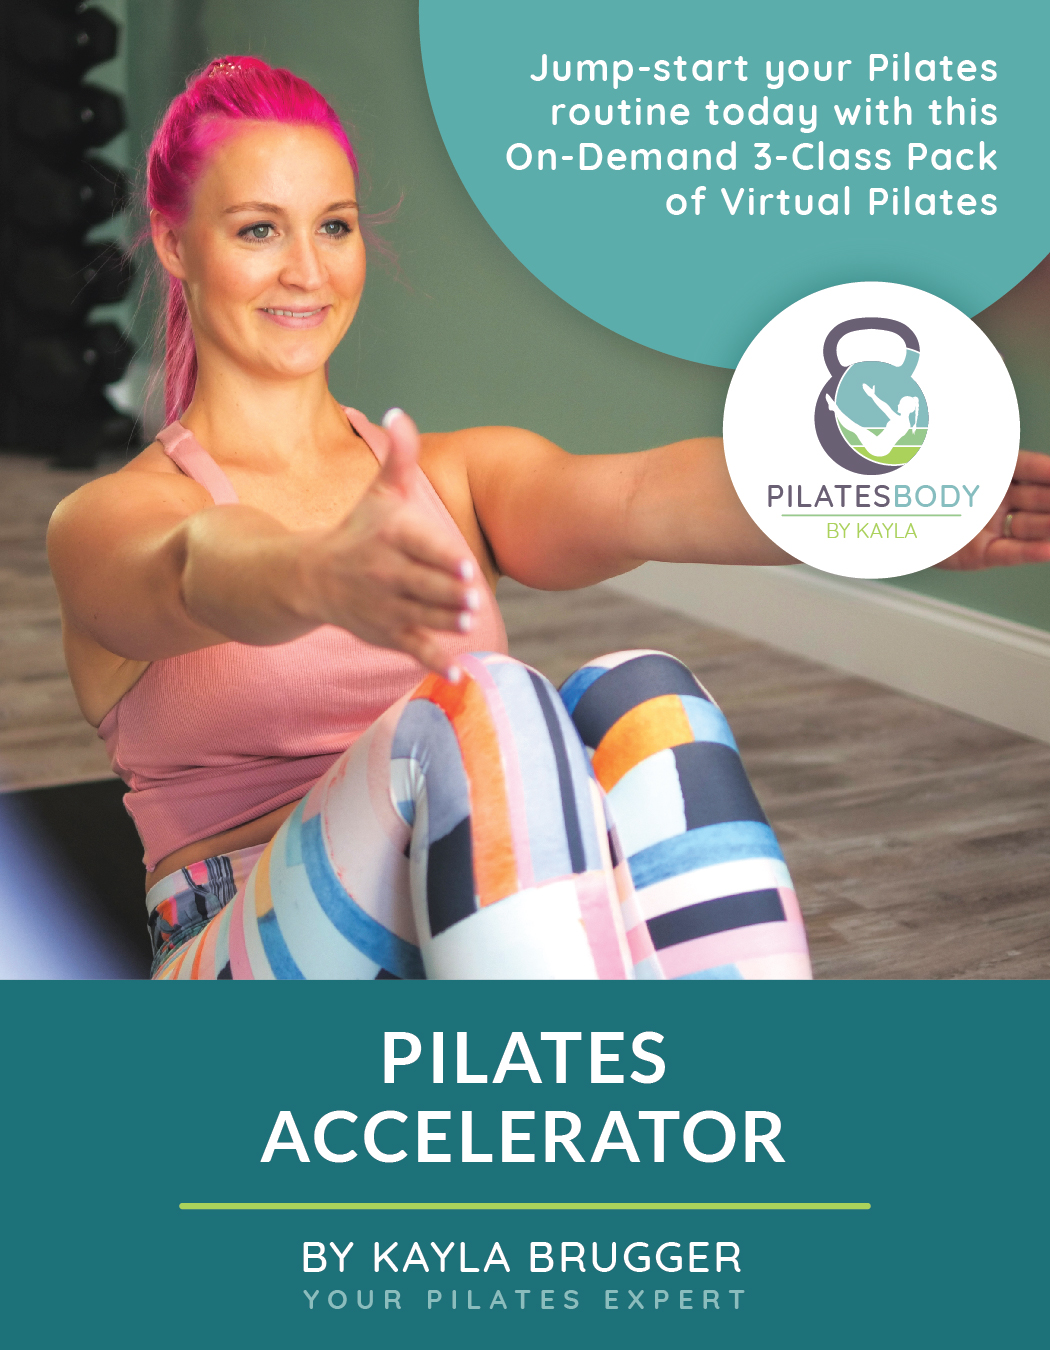 7 Pilates Exercises for Beginners Starting At Home - PILATESBODY by Kayla